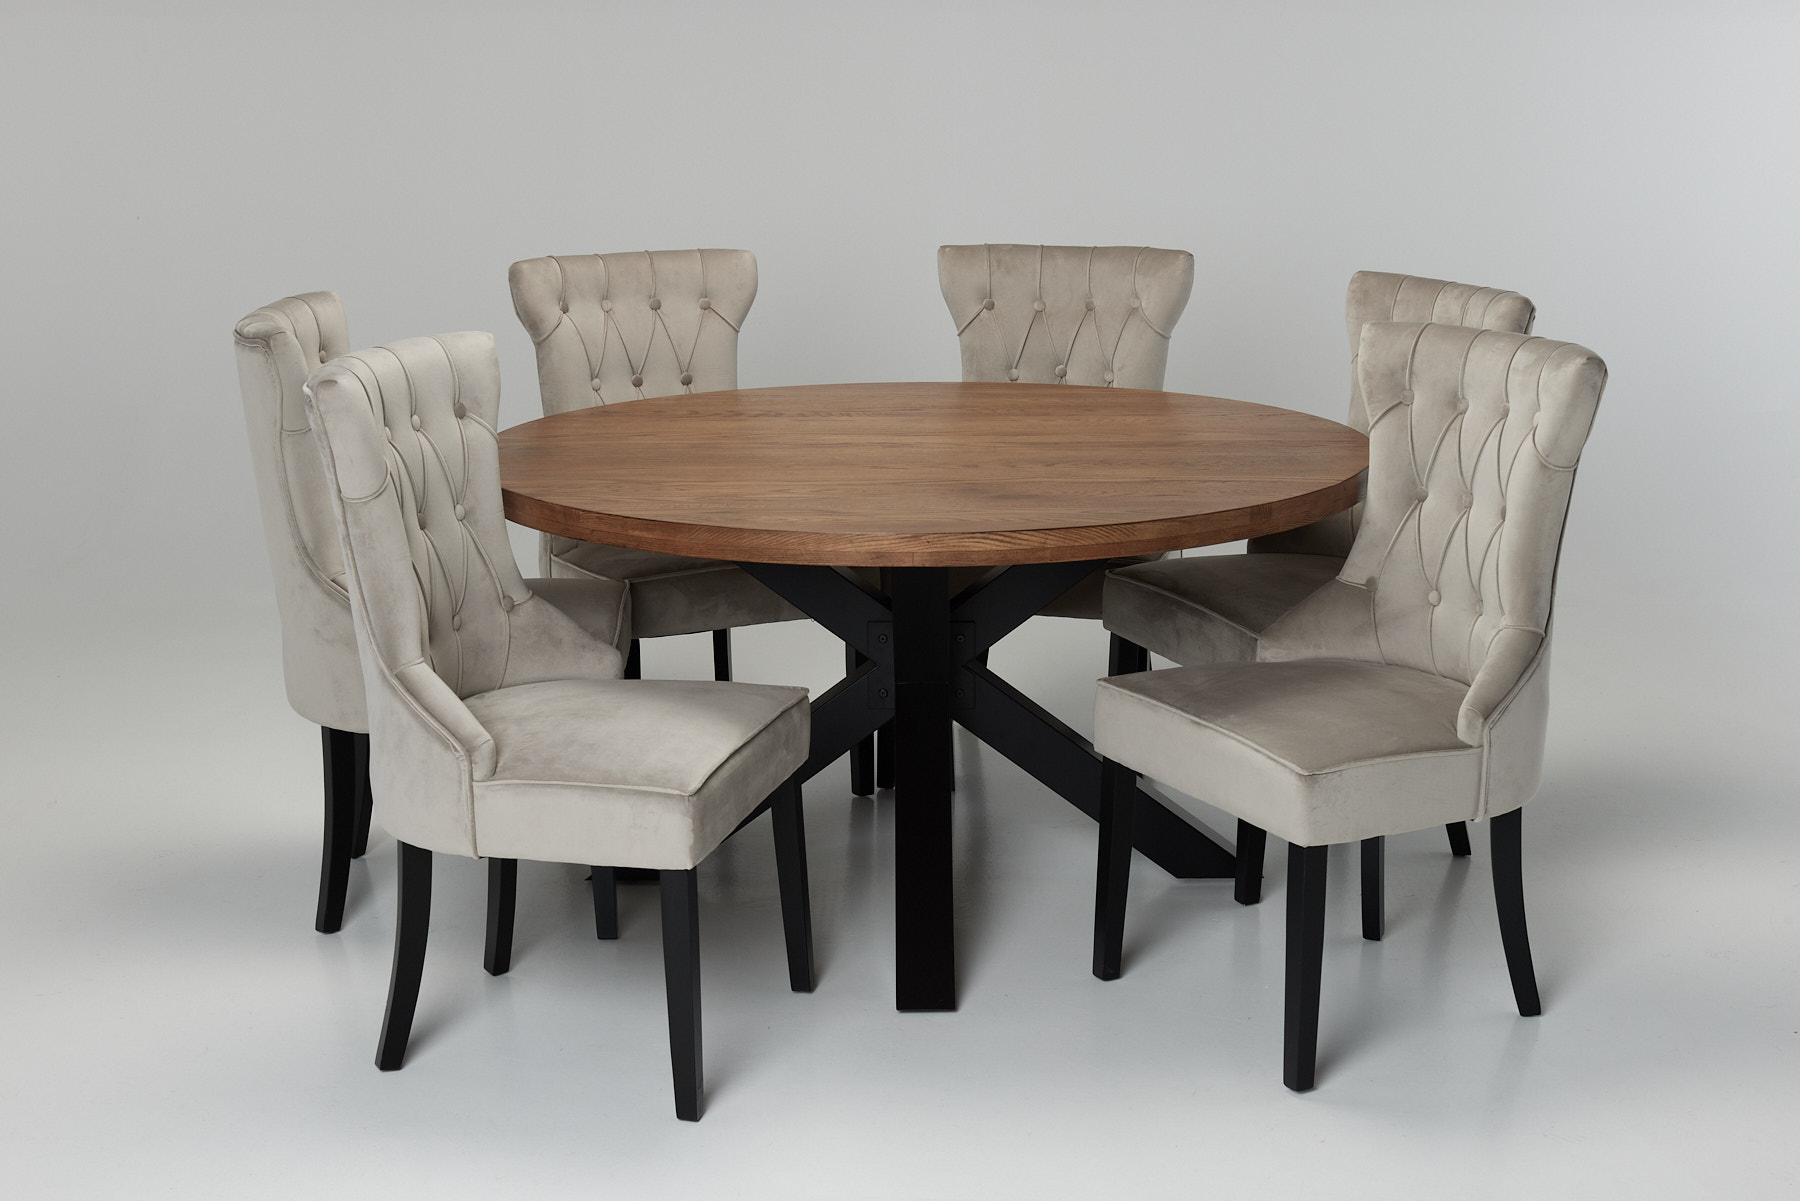 Oakford & Cleo Dining Set - 1.5m Solid Oak Round Dining Table with 6 Mink Velvet Dining Chairs